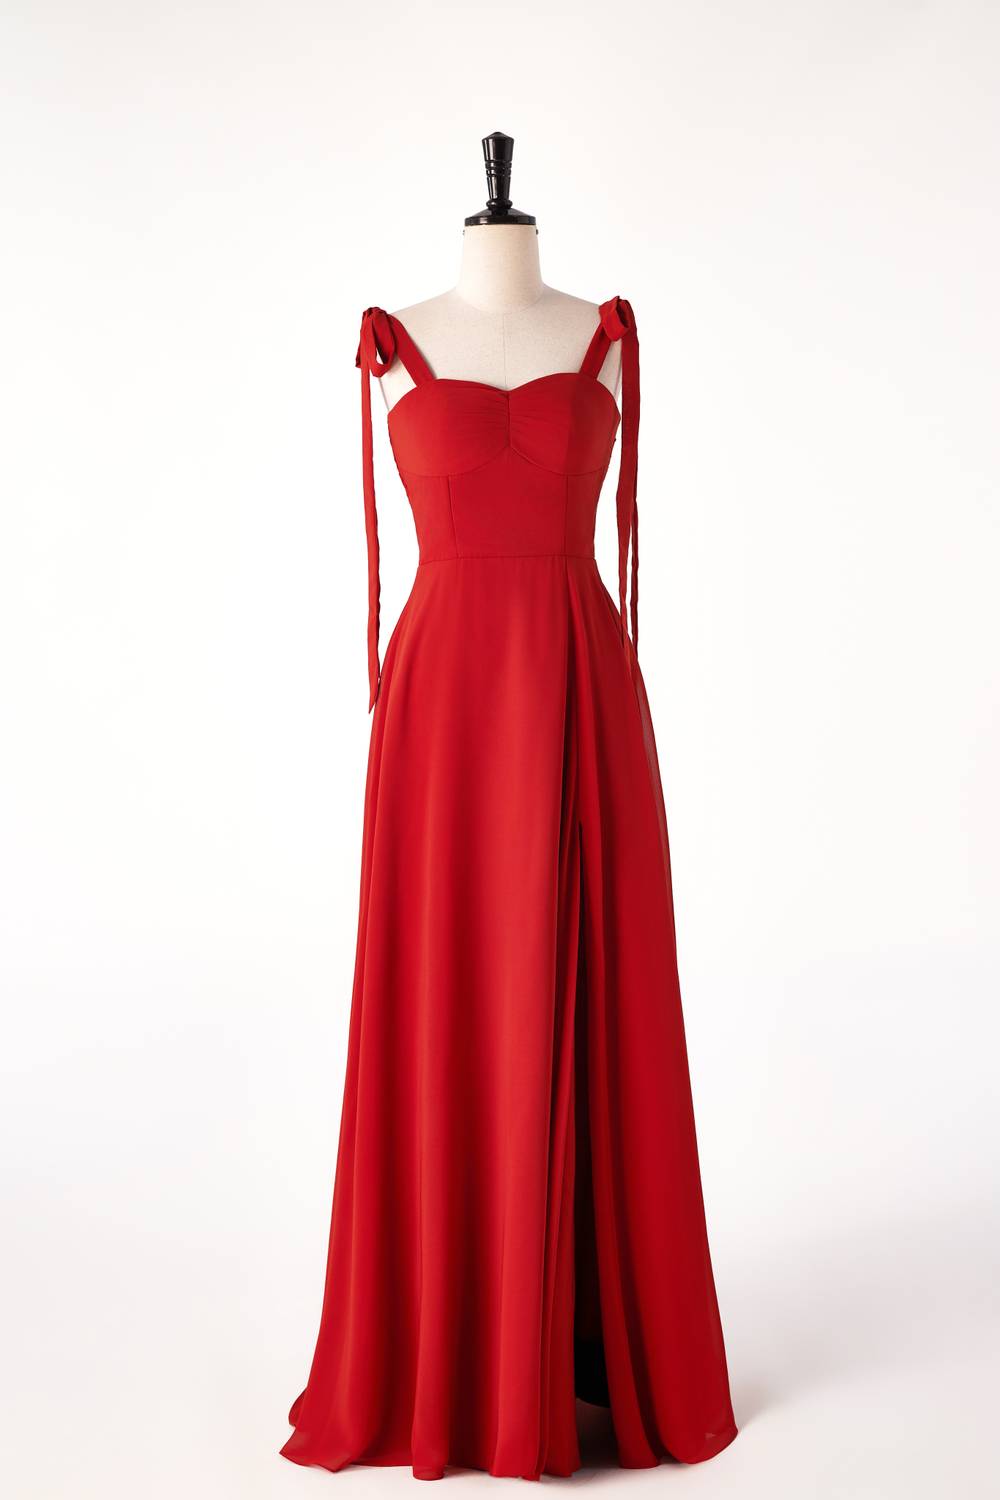 Prom Dress 2039, Rust Red Chiffon Long Bridesmaid Dress with Tie Shoulders